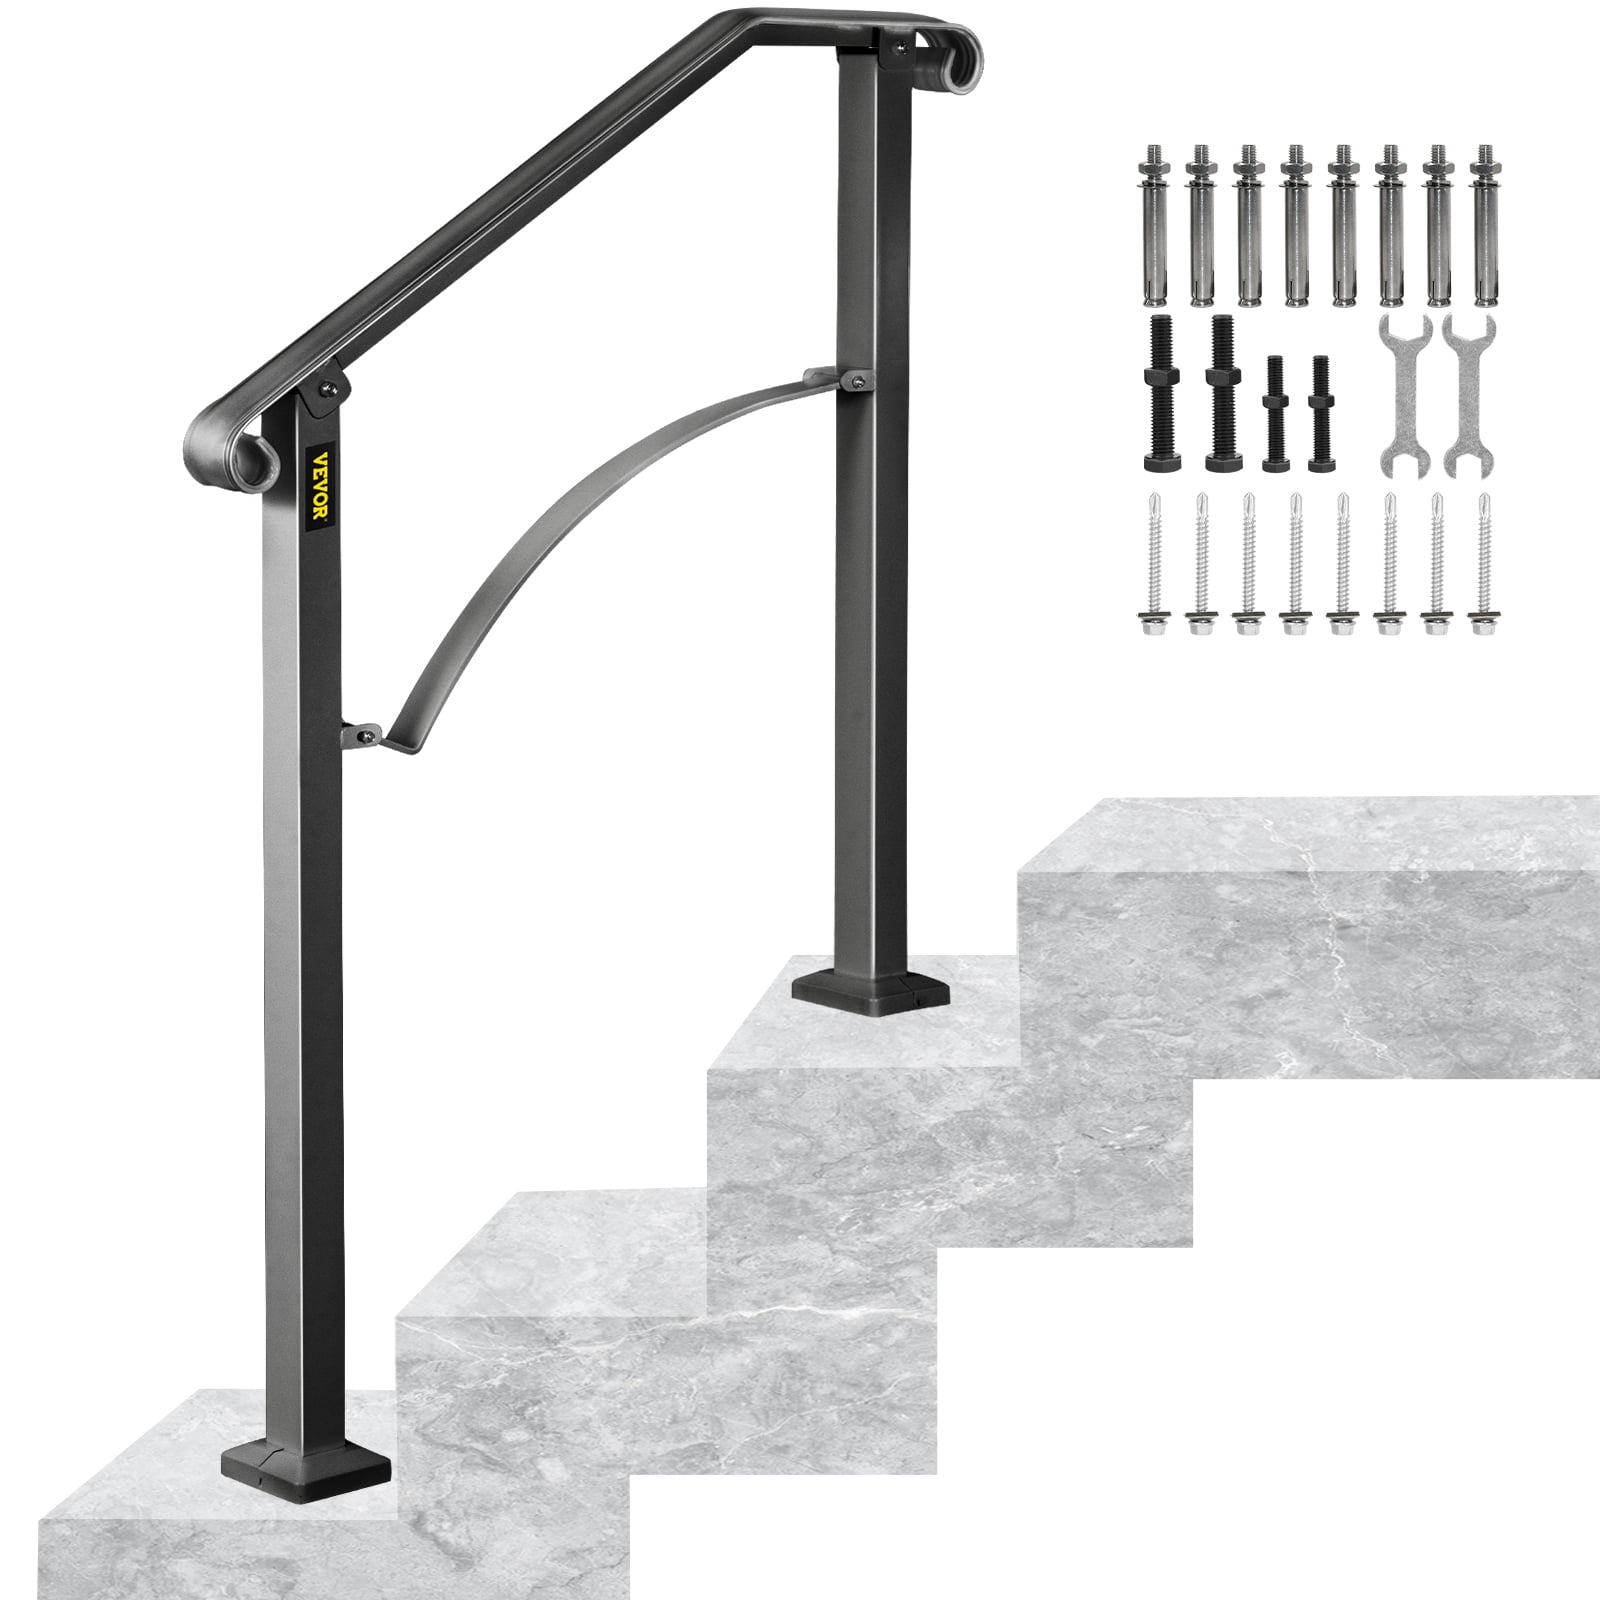 VEVOR Handrails for Outdoor Steps Black Transitional Hand railings for Concrete Steps or Wooden Stairs Adjustable Front Porch Hand Rail Wrought Iron Handrail Fit 1-3 Steps Outdoor Stair Railing